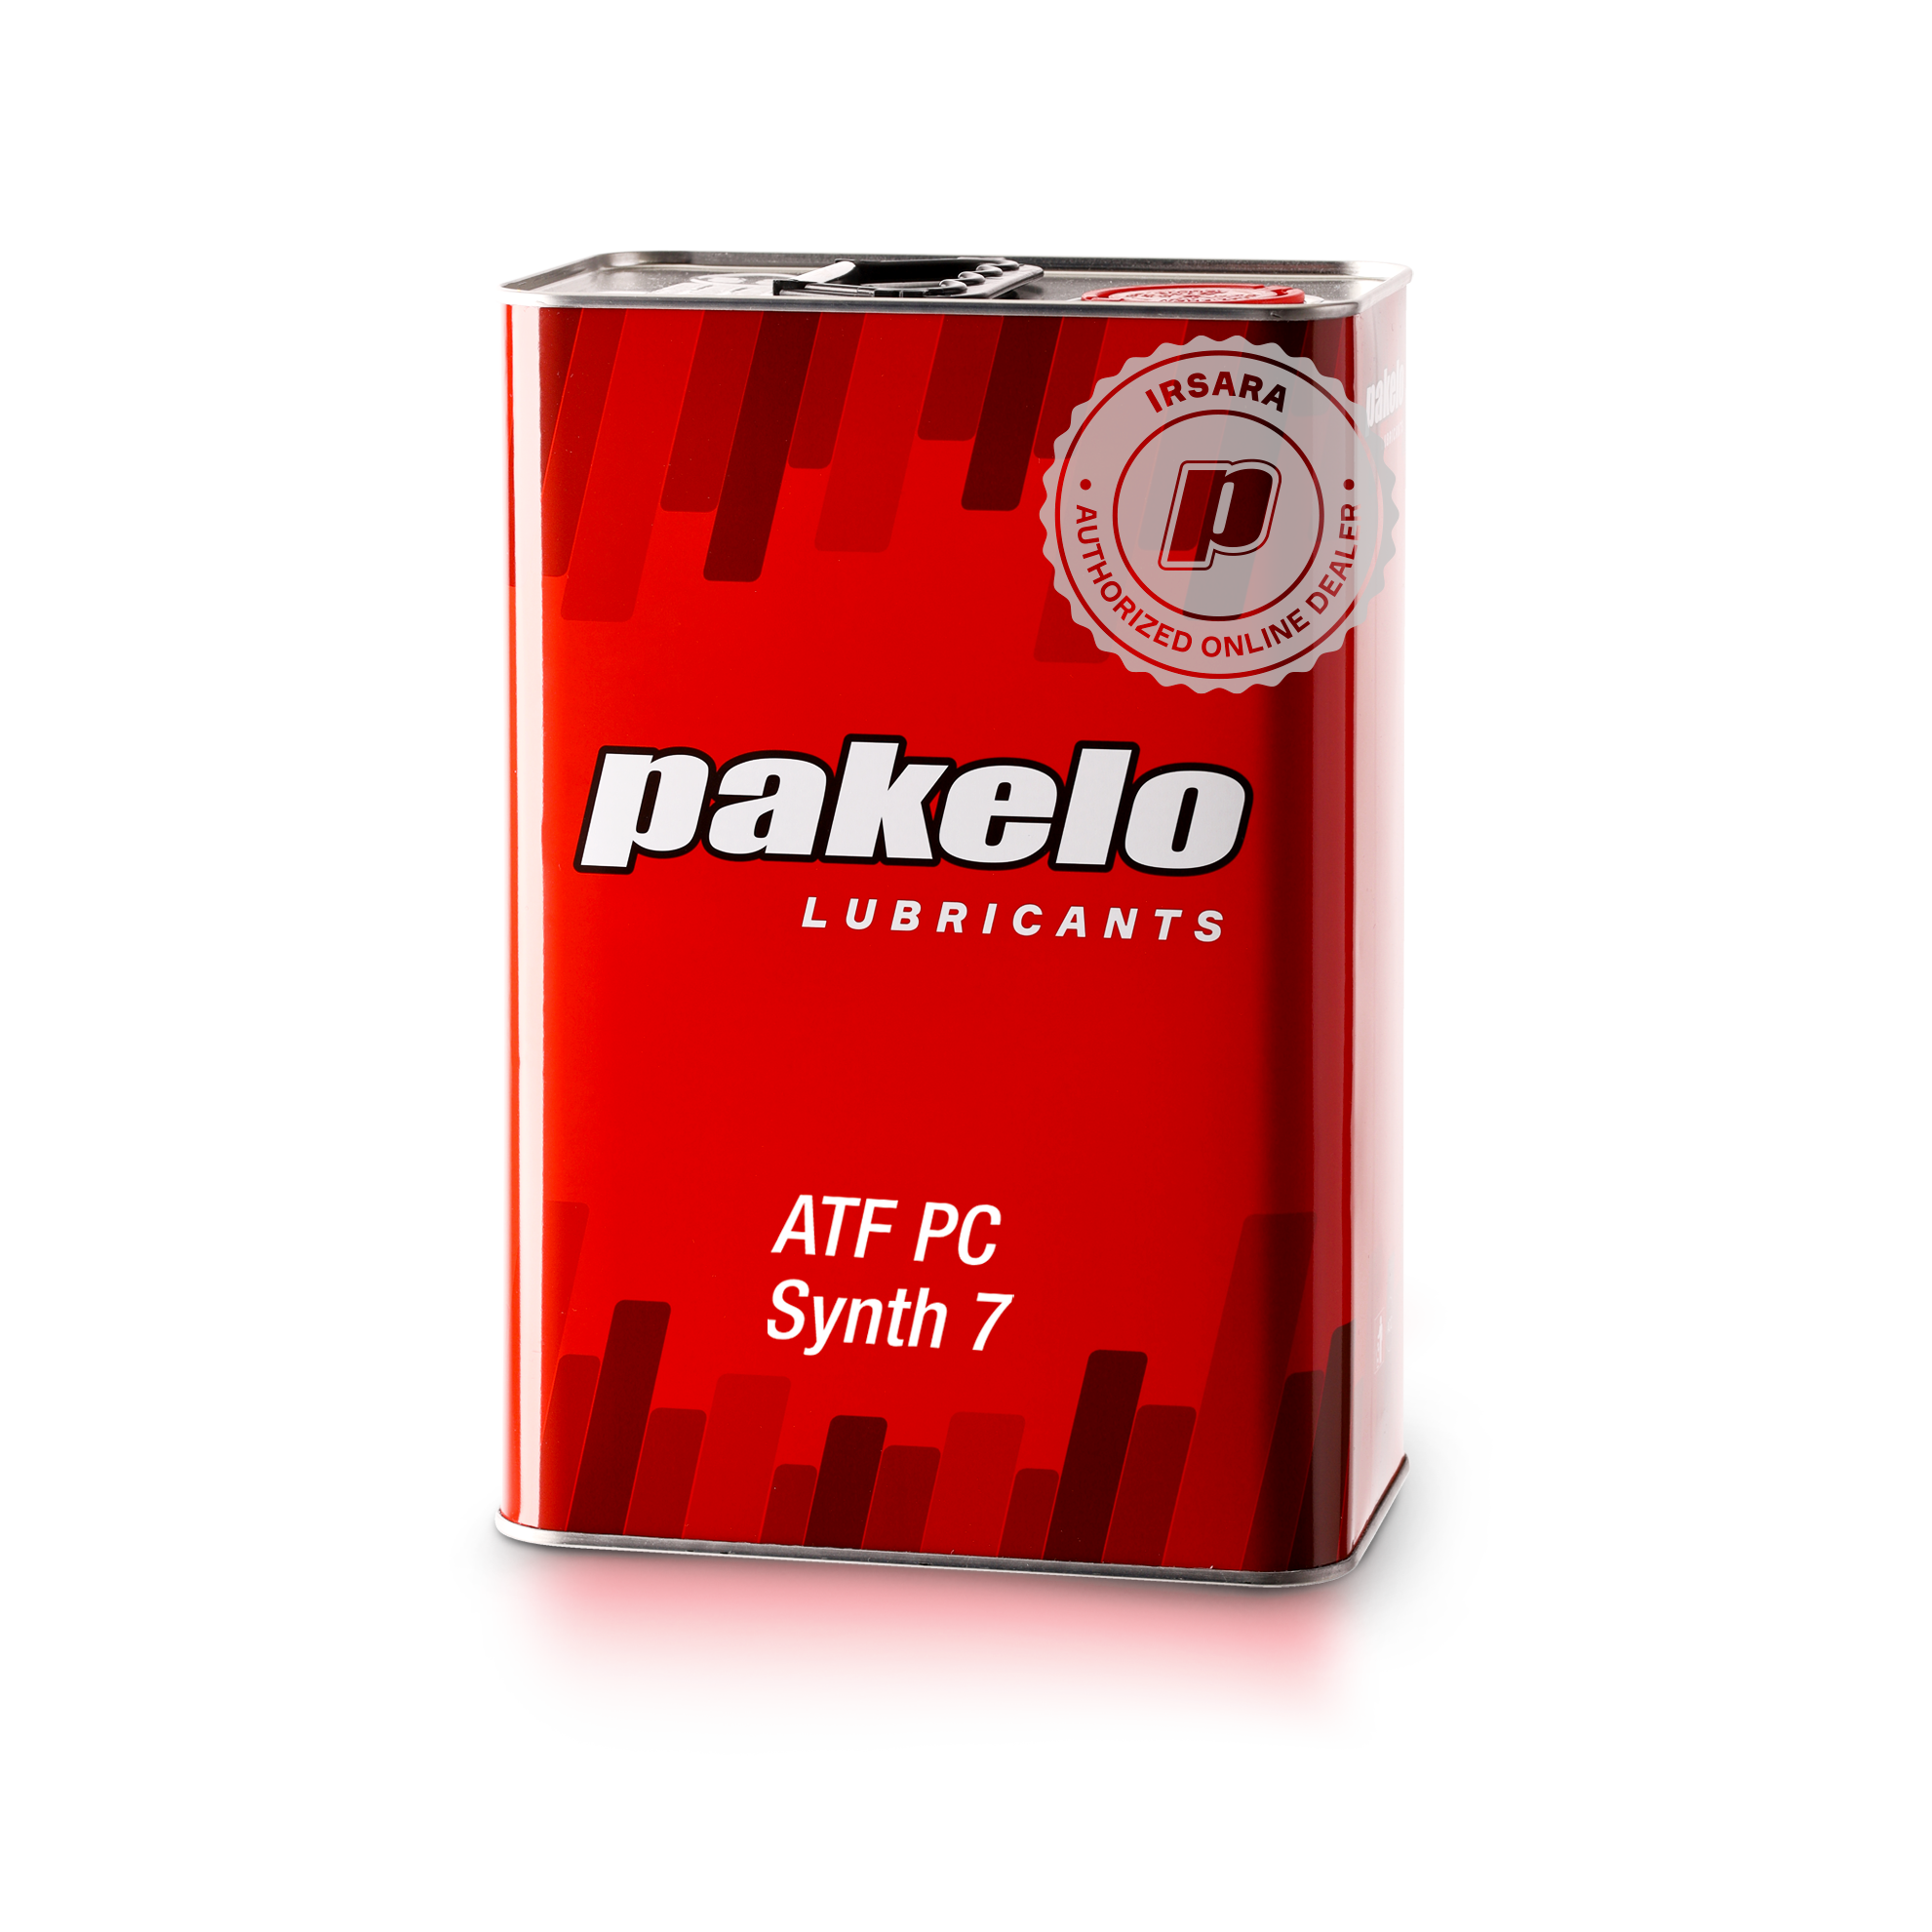 Pakelo Atf Pc Synth 7 (4 L)